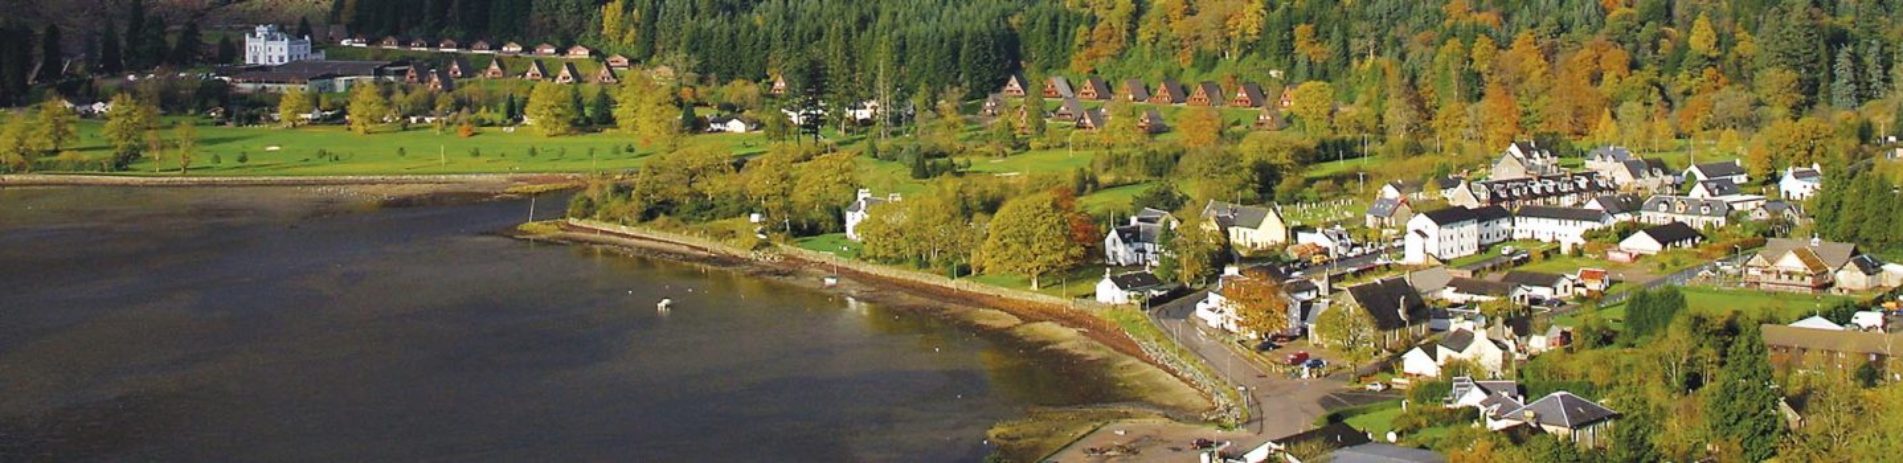 lochgoilhead-village-in-sunshine-surrounded-by-greenery-and-holiday-chalets-on-shore-of-loch-goil